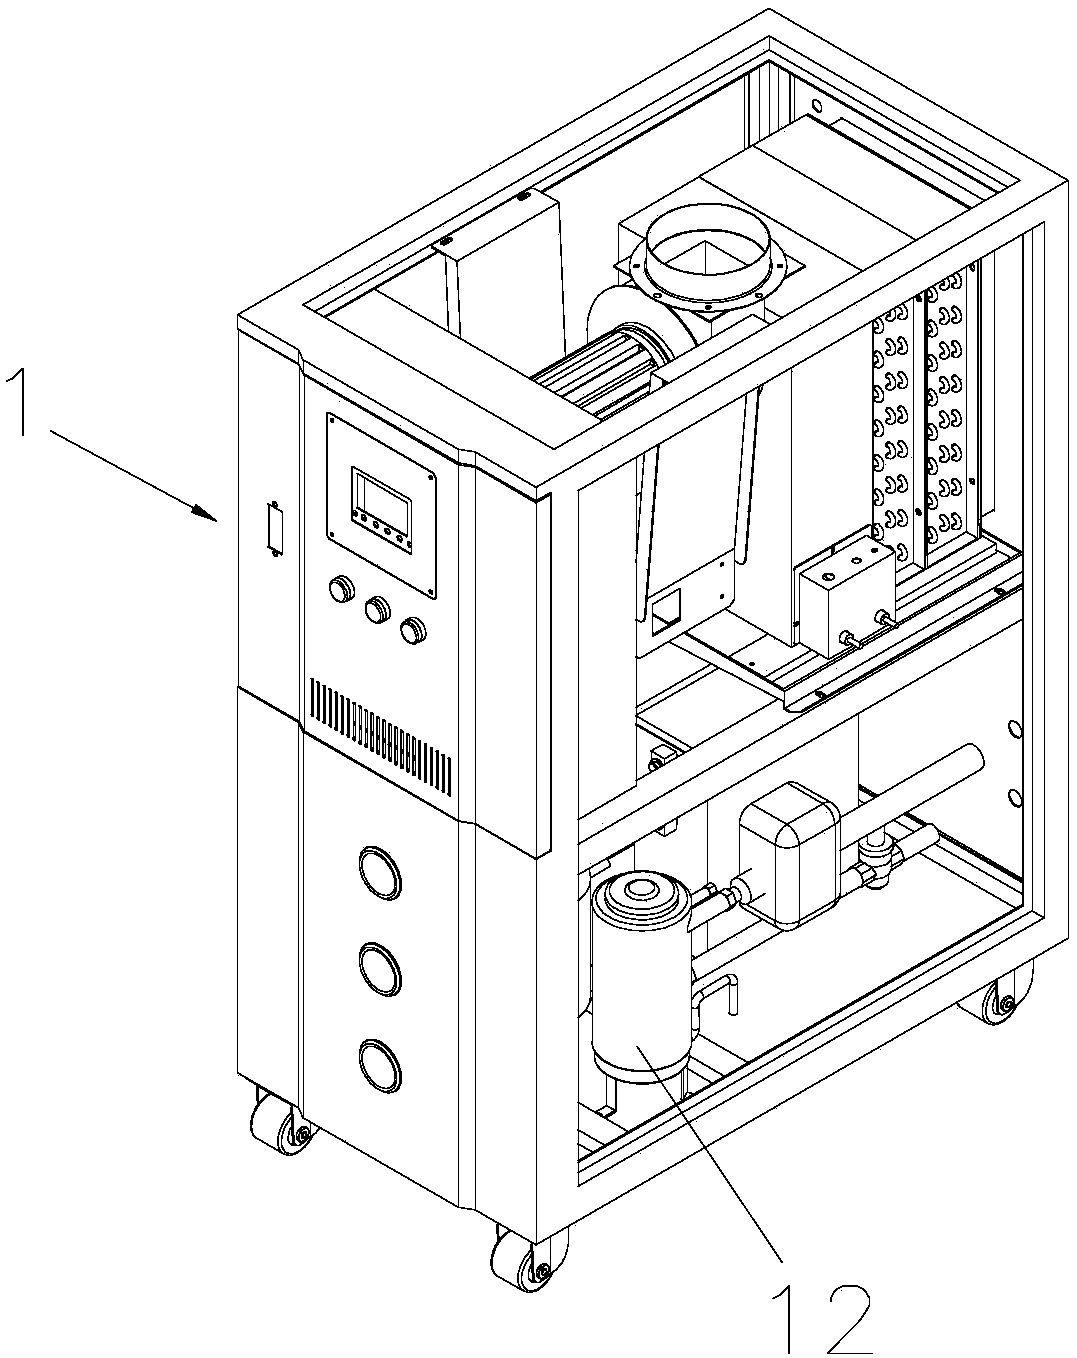 Improved structure of constant-temperature and constant-humidity machine